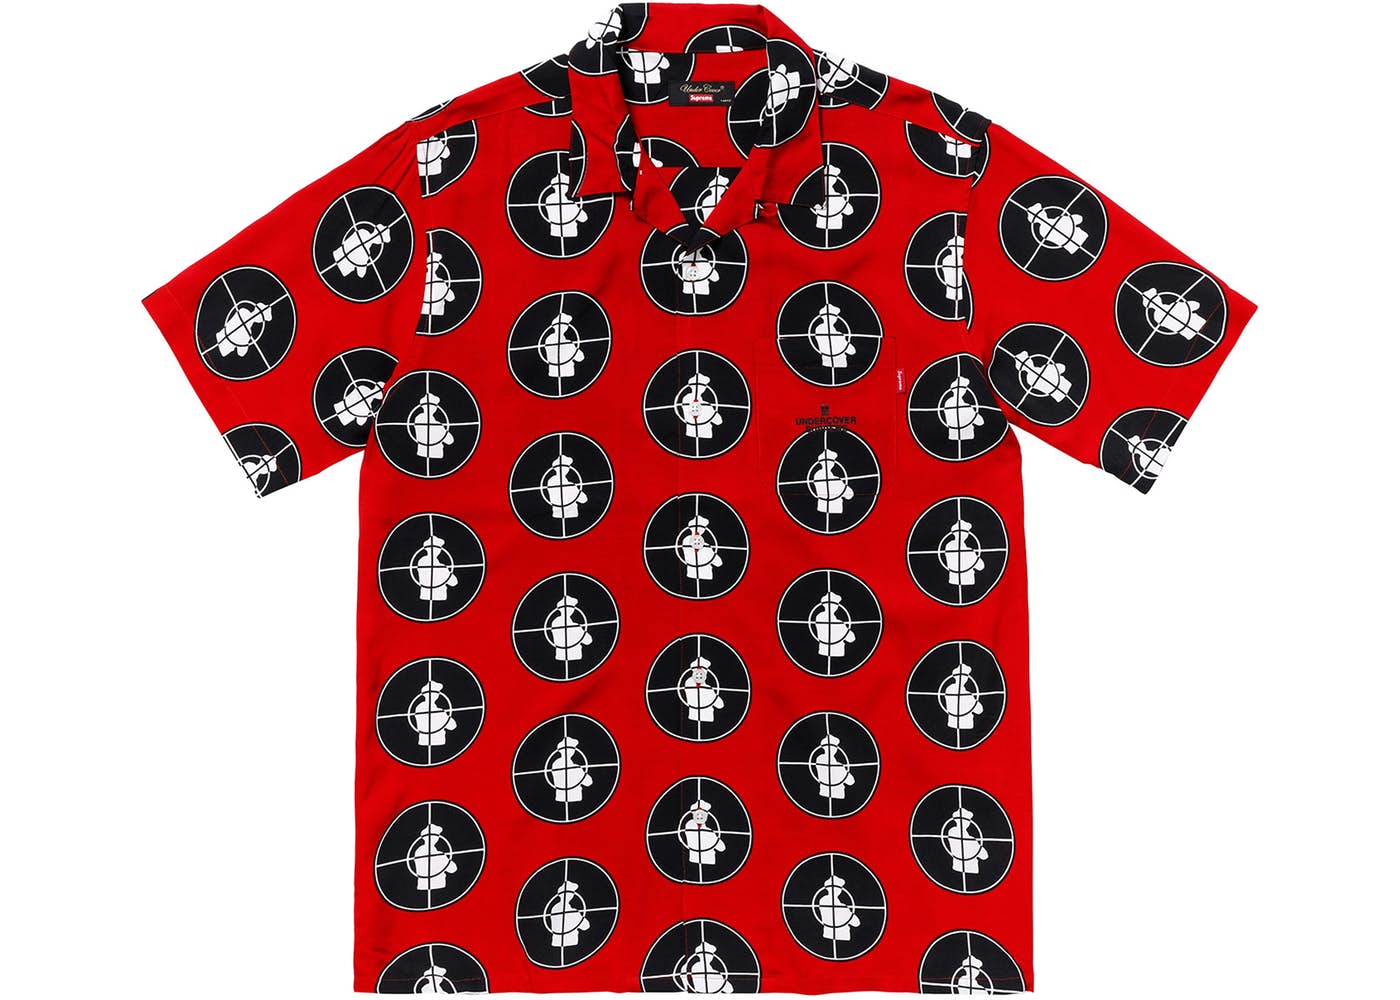 https://images-wp.stockx.com/news/wp-content/uploads/2018/03/Supreme-UNDERCOVER-Public-Enemy-Rayon-Shirt-Red.jpg